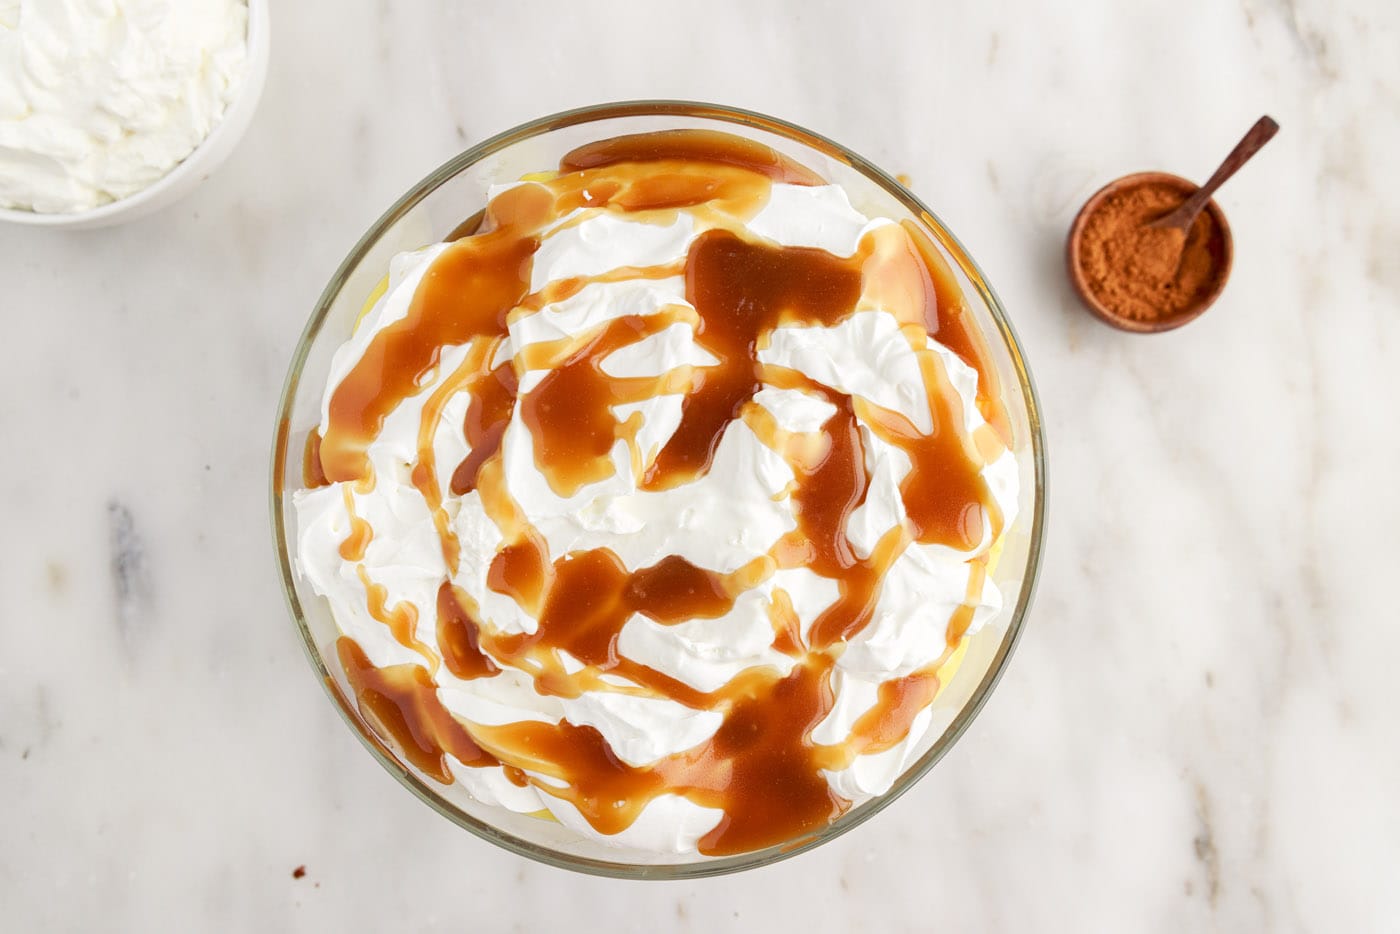 whipped cream and caramel sauce on top of gingerbread trifle